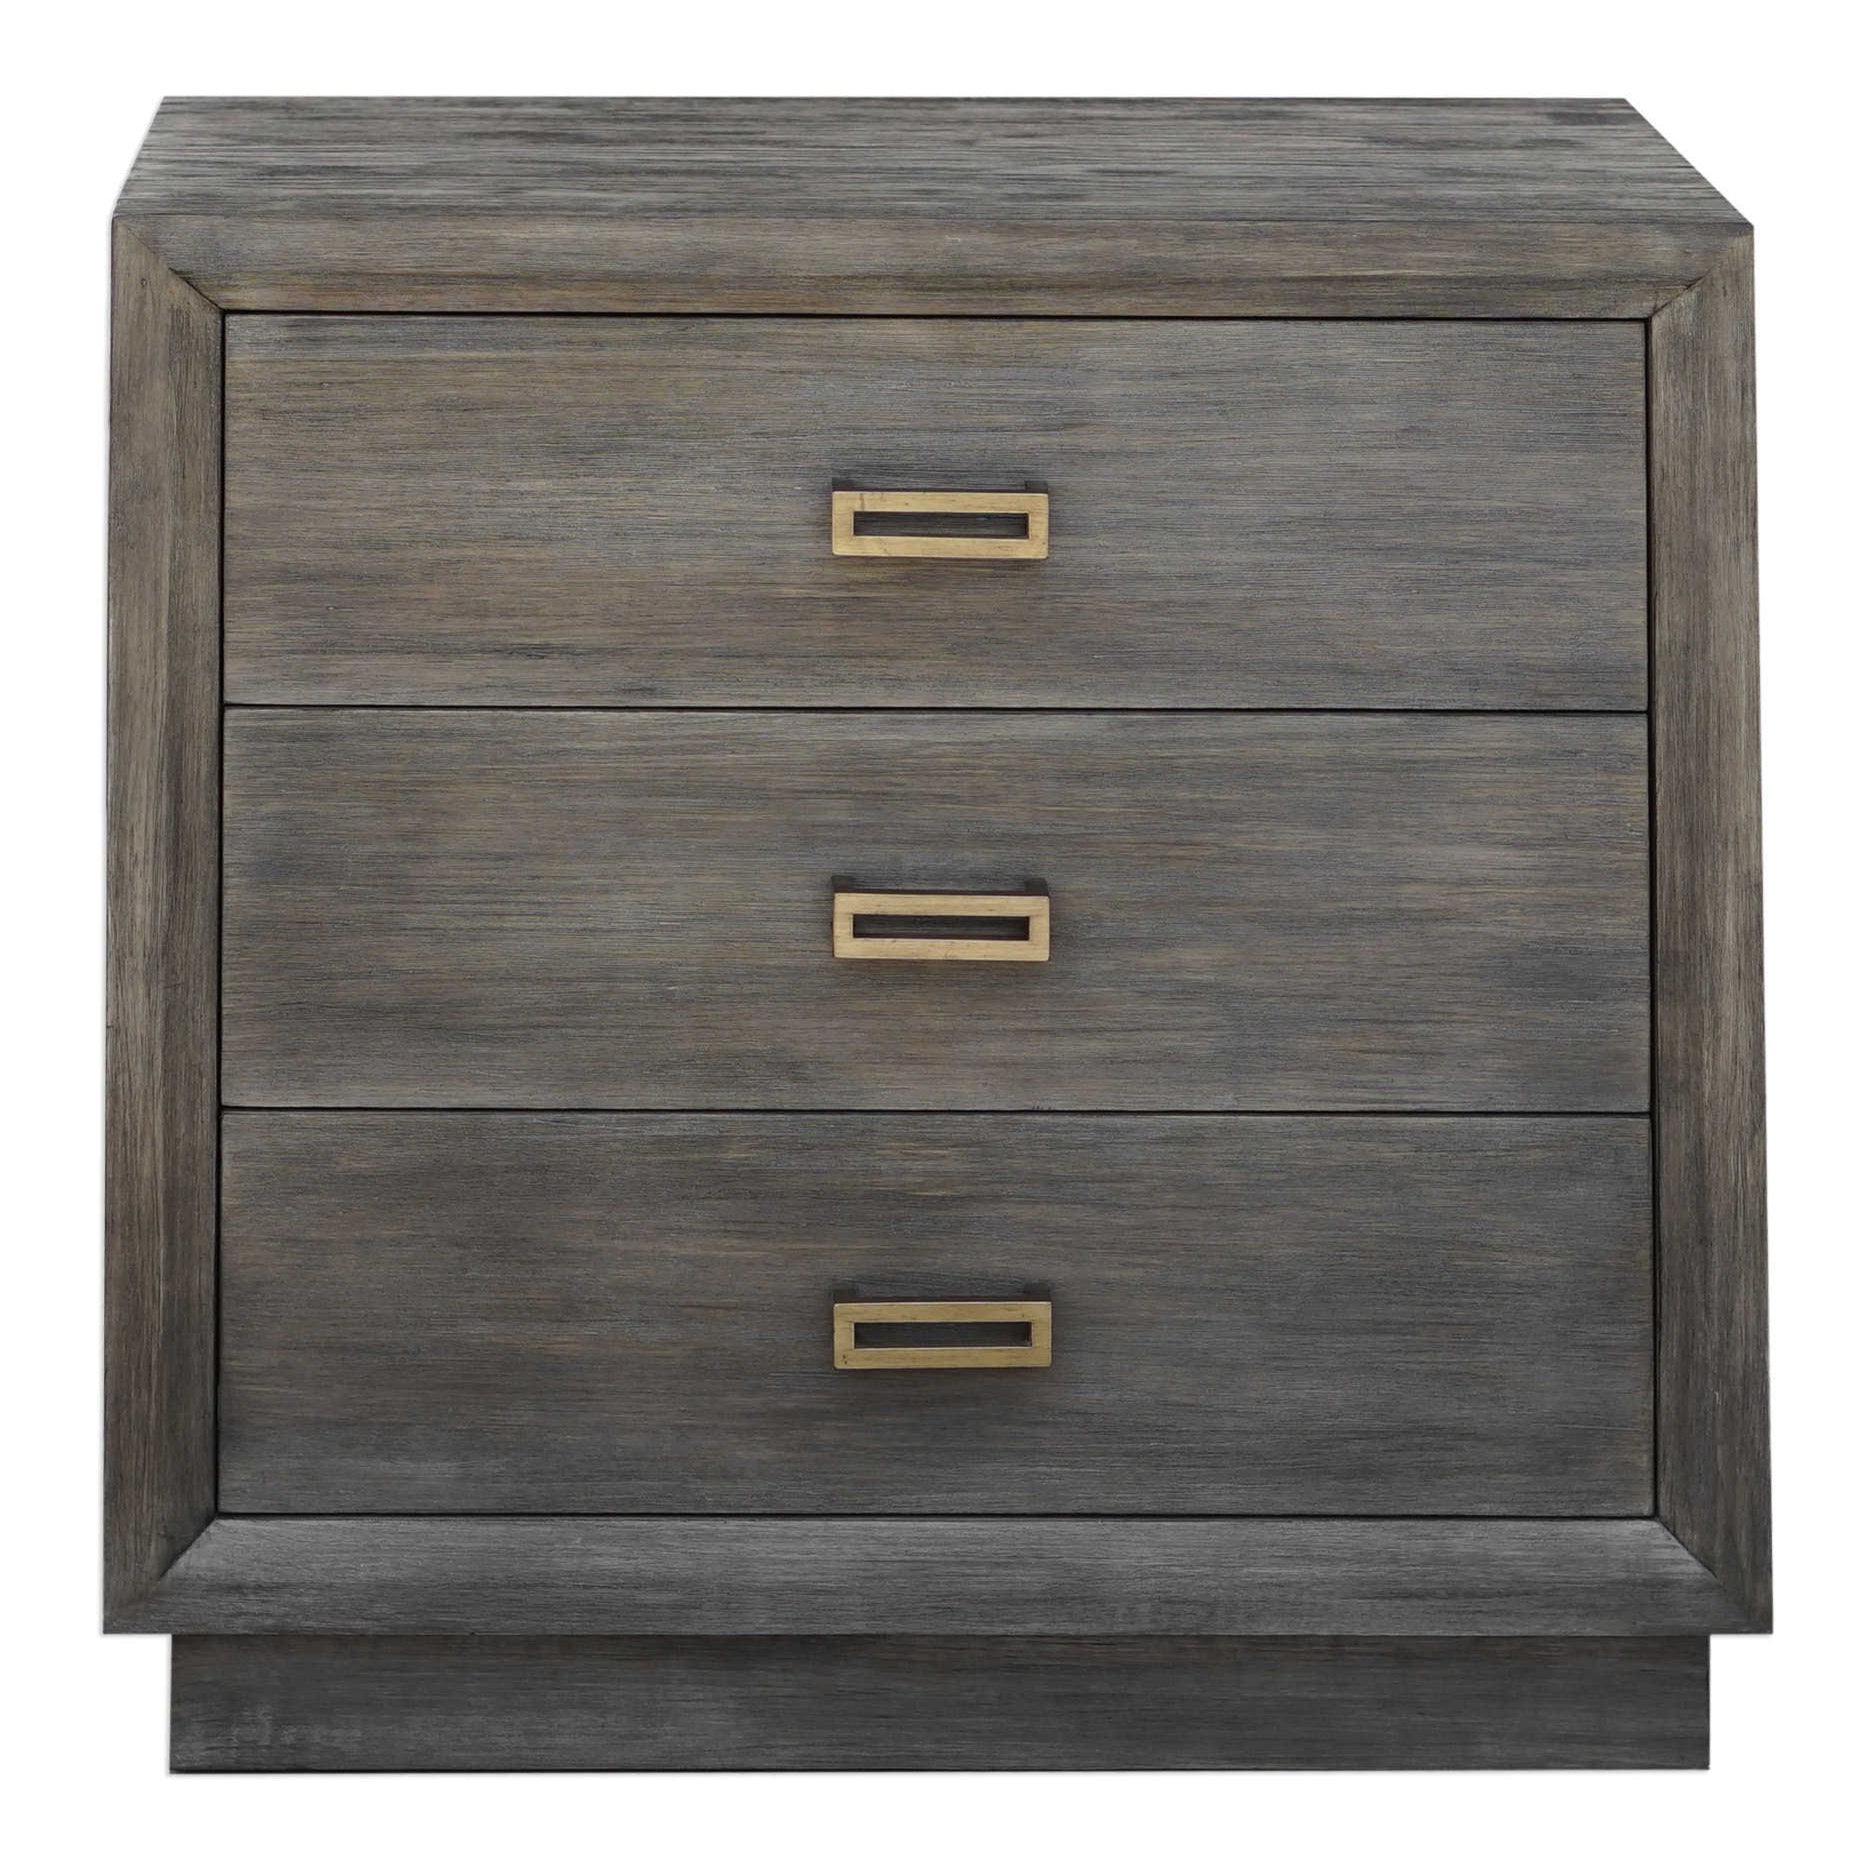 Theron Accent Chest